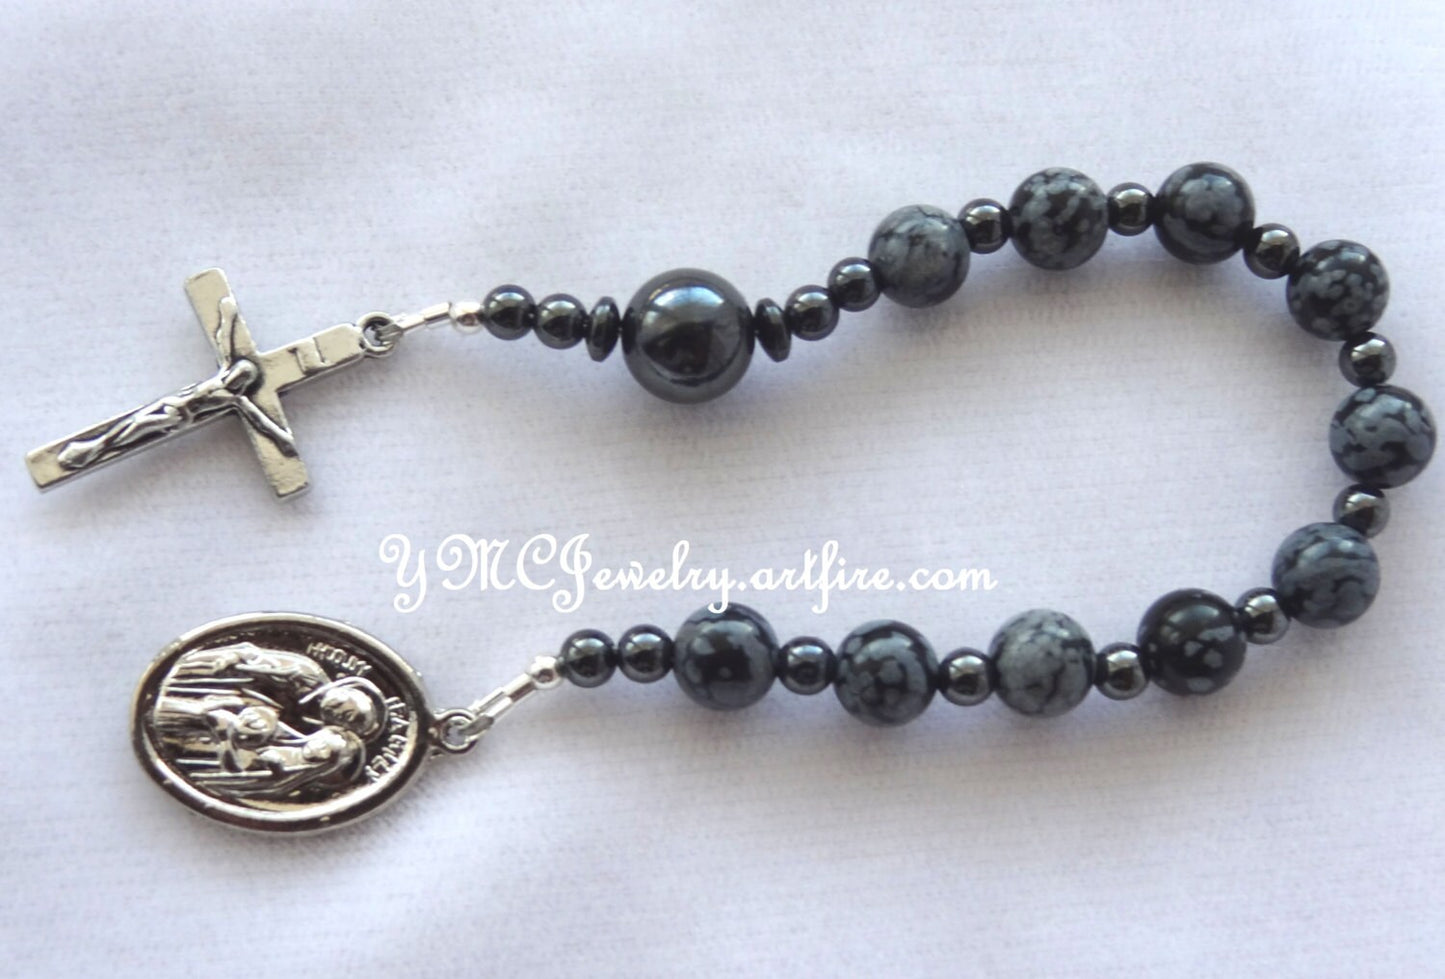 Chaplet Rosary, First Communion, Godparents Present, Angel Chaplet, Boys Confirmation, Black and Gray Chaplet, Snowflake Hematite Chaplet